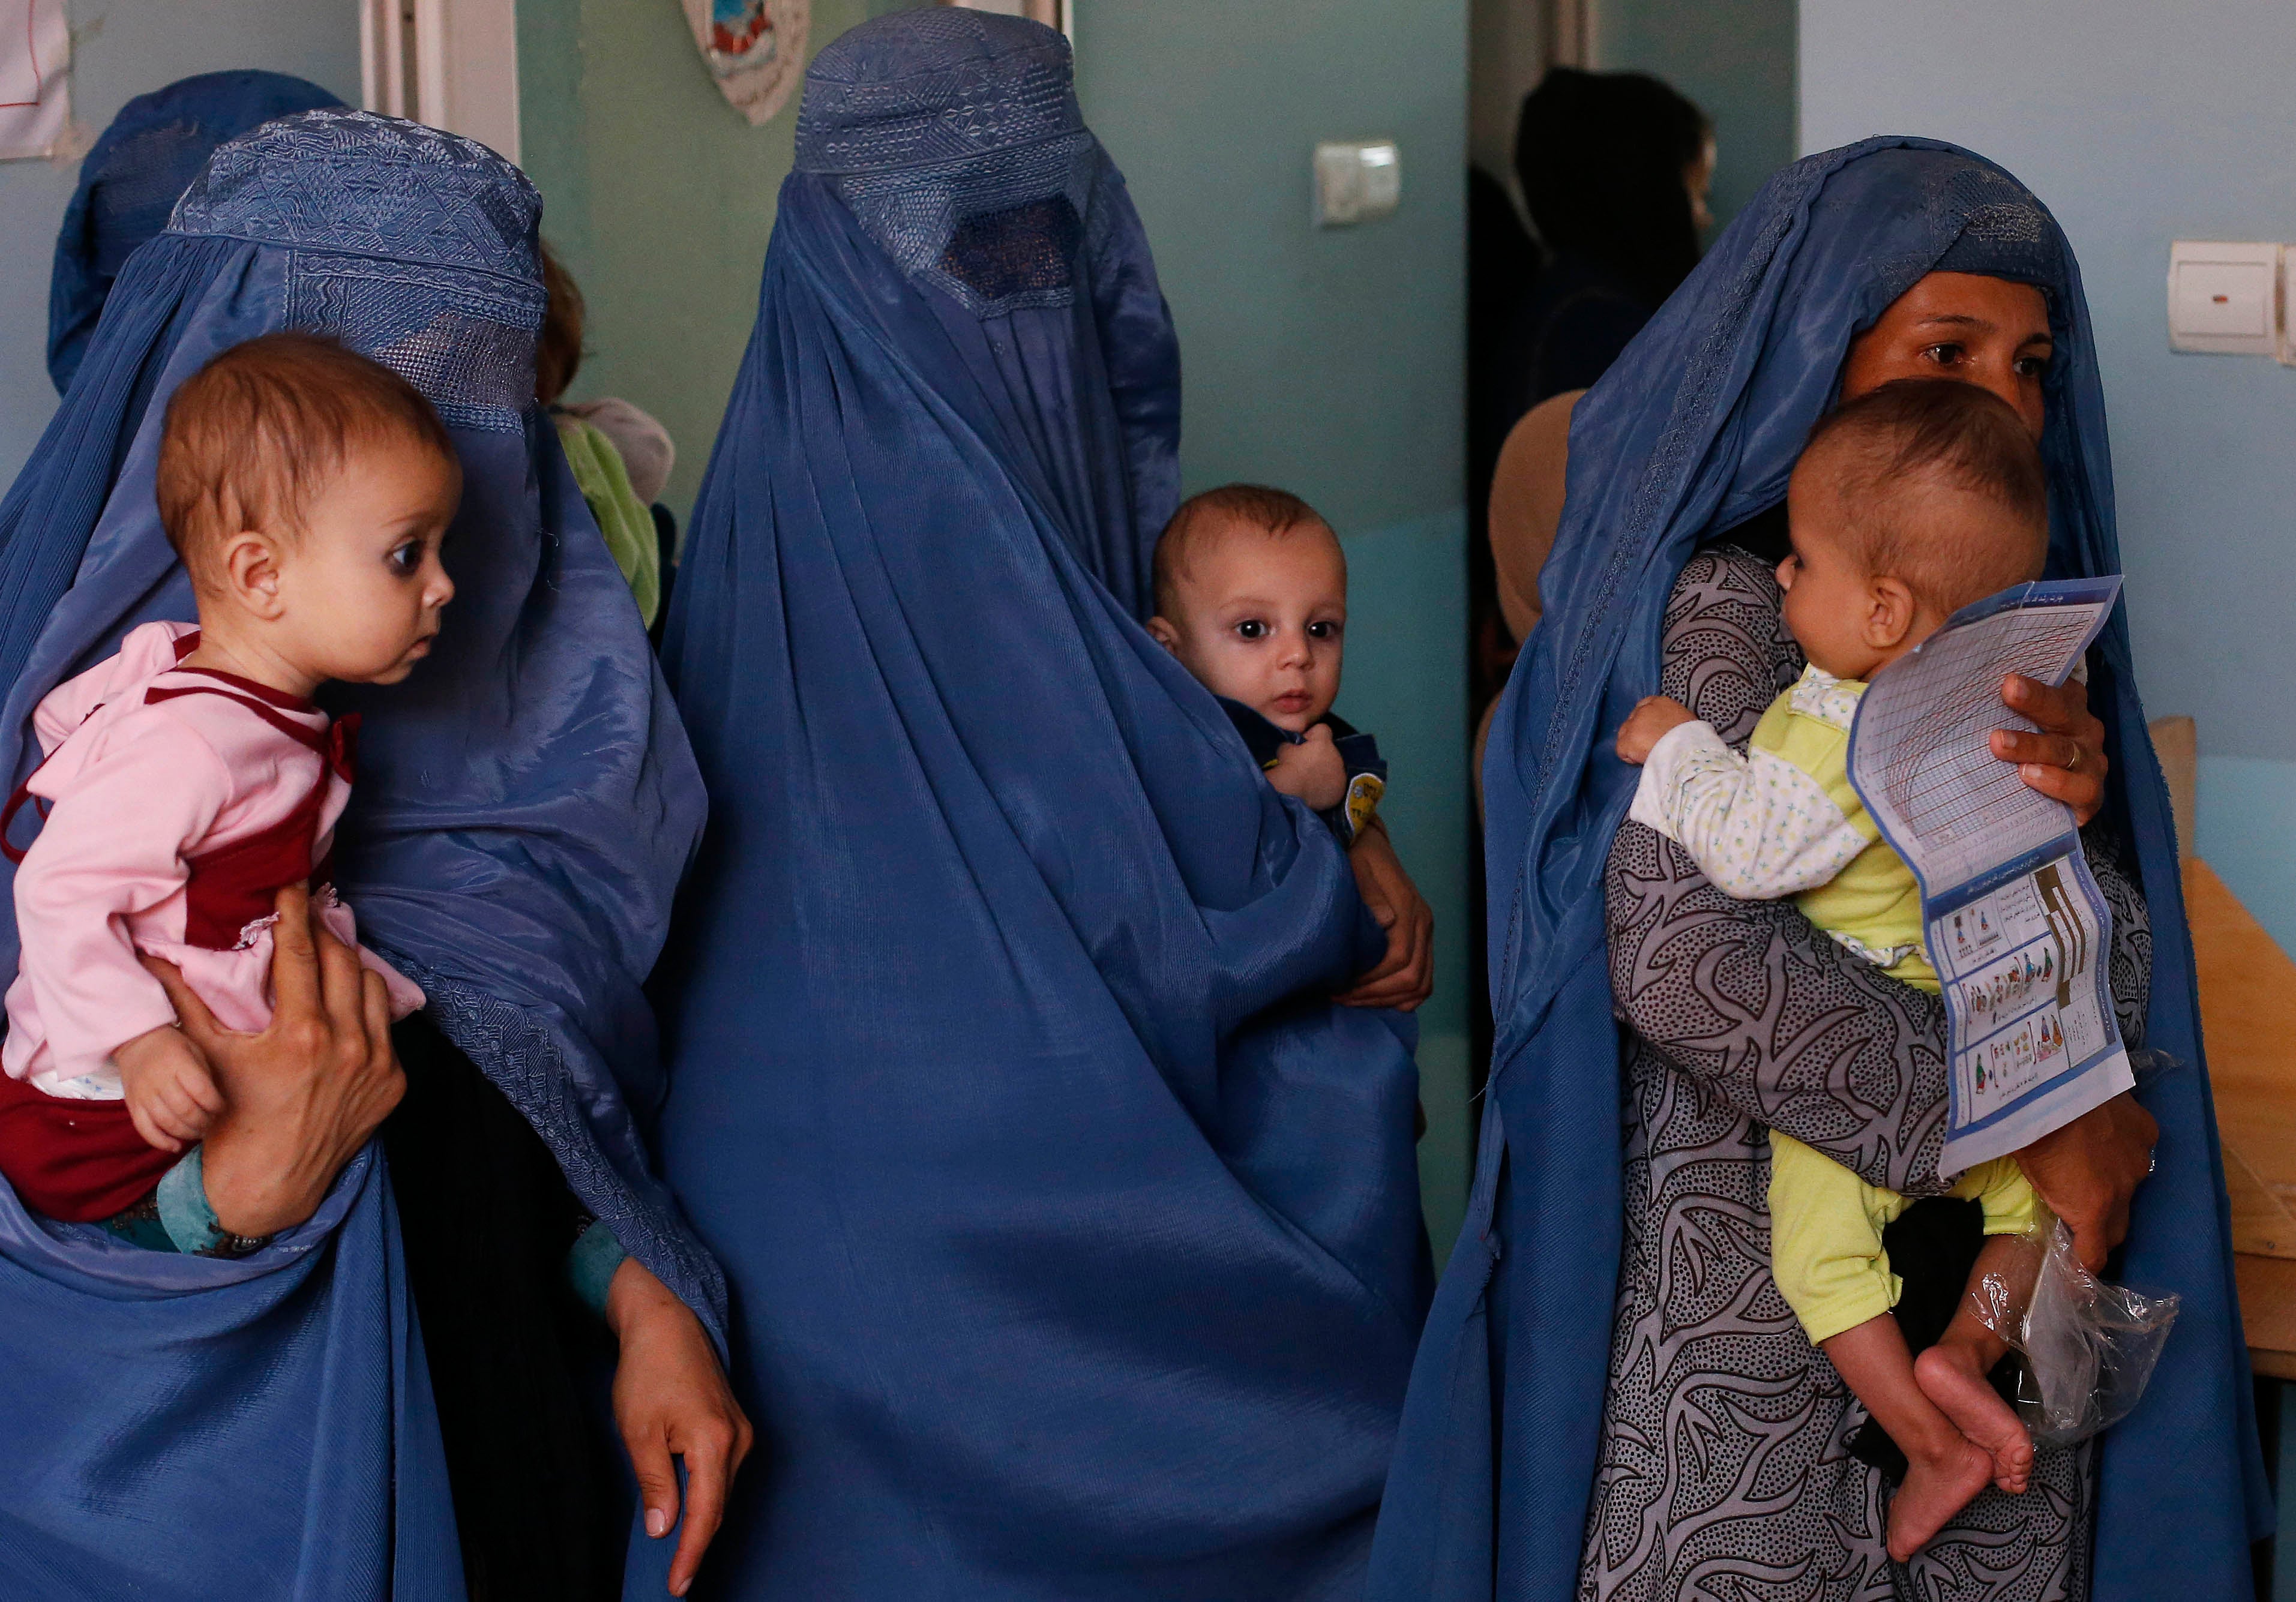 Afghanistan: Donors Should Support Rights Gains